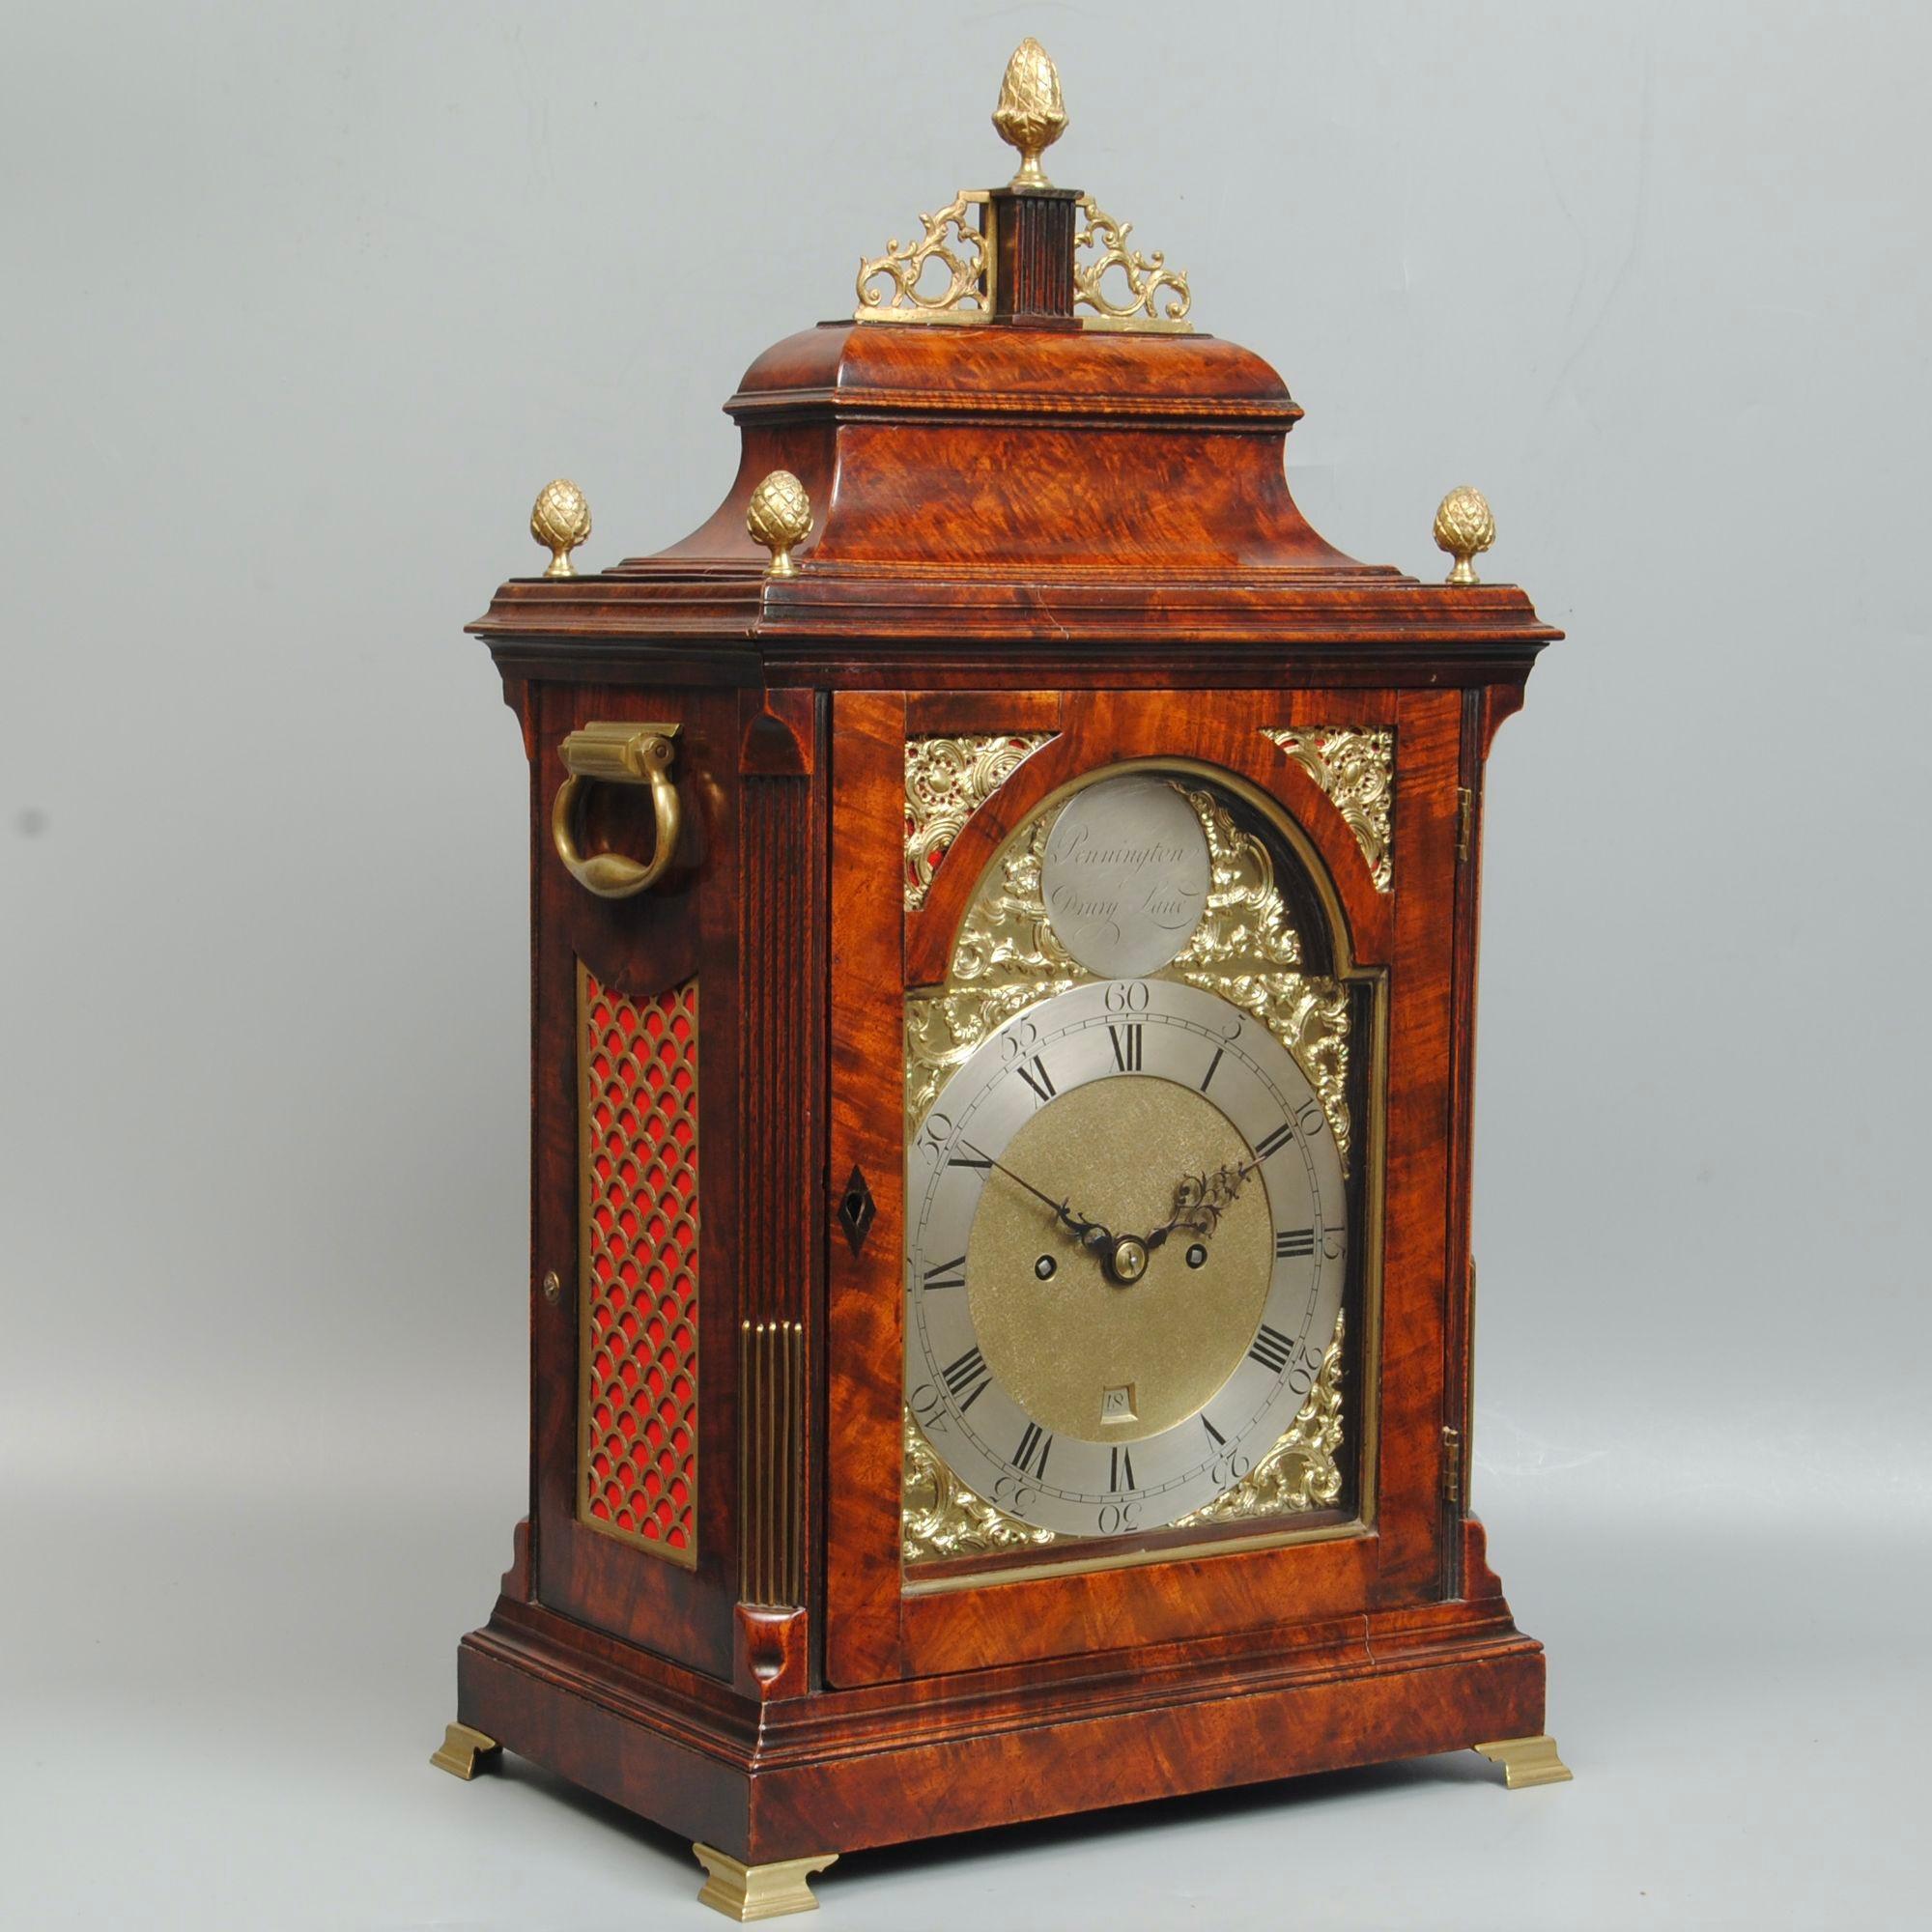 An 18th century mahogany and ormolu mounted bell top bracket clock. The 8-day movement with finely engraved back plate and the full brass dial signed Pennington, Drury Lane
Circa 1785
The Pennington family of clock makers have some interesting